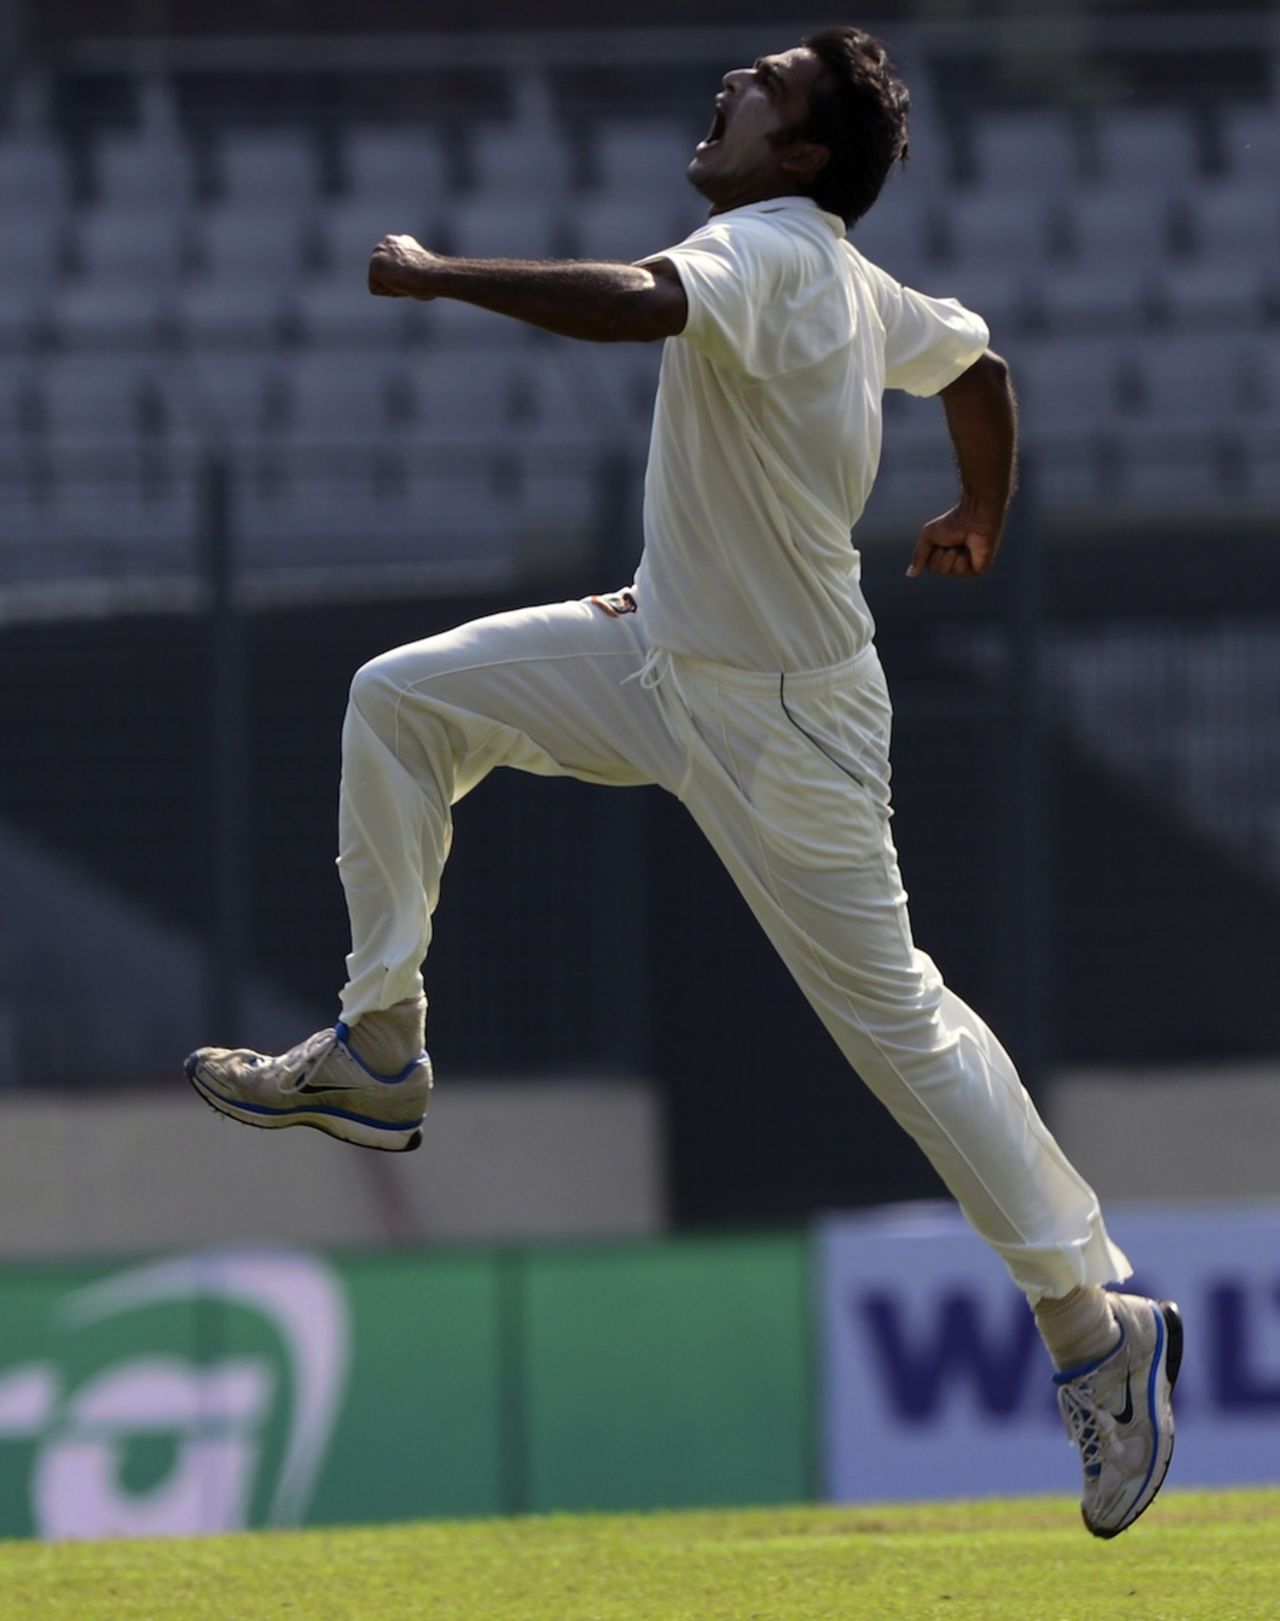 Shahadat Hossain celebrates a wicket in the first over, Bangladesh v Zimbabwe, 1st Test, Mirpur, 1st day, October 25, 2014